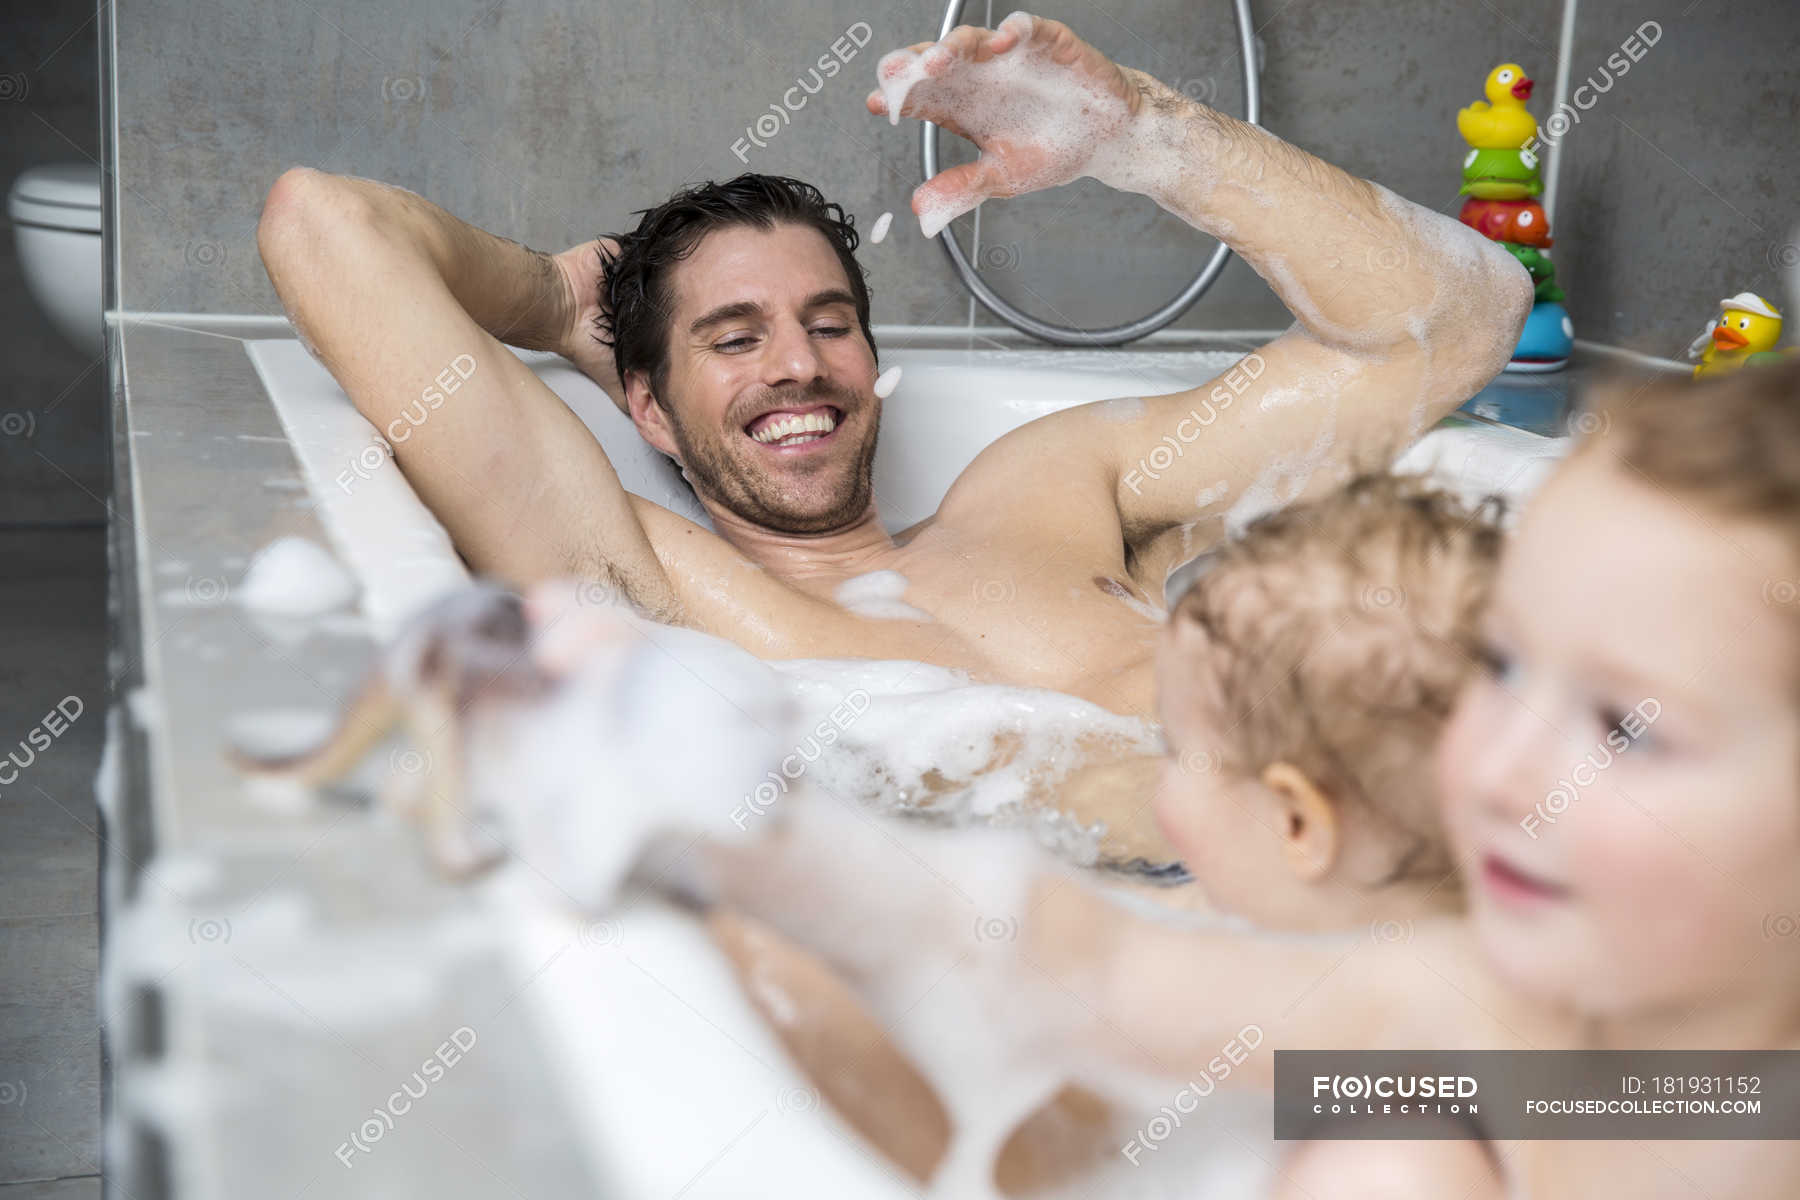 Father having fun with sons in bathtub - people, 4 5 Years - Stock Photo #1...